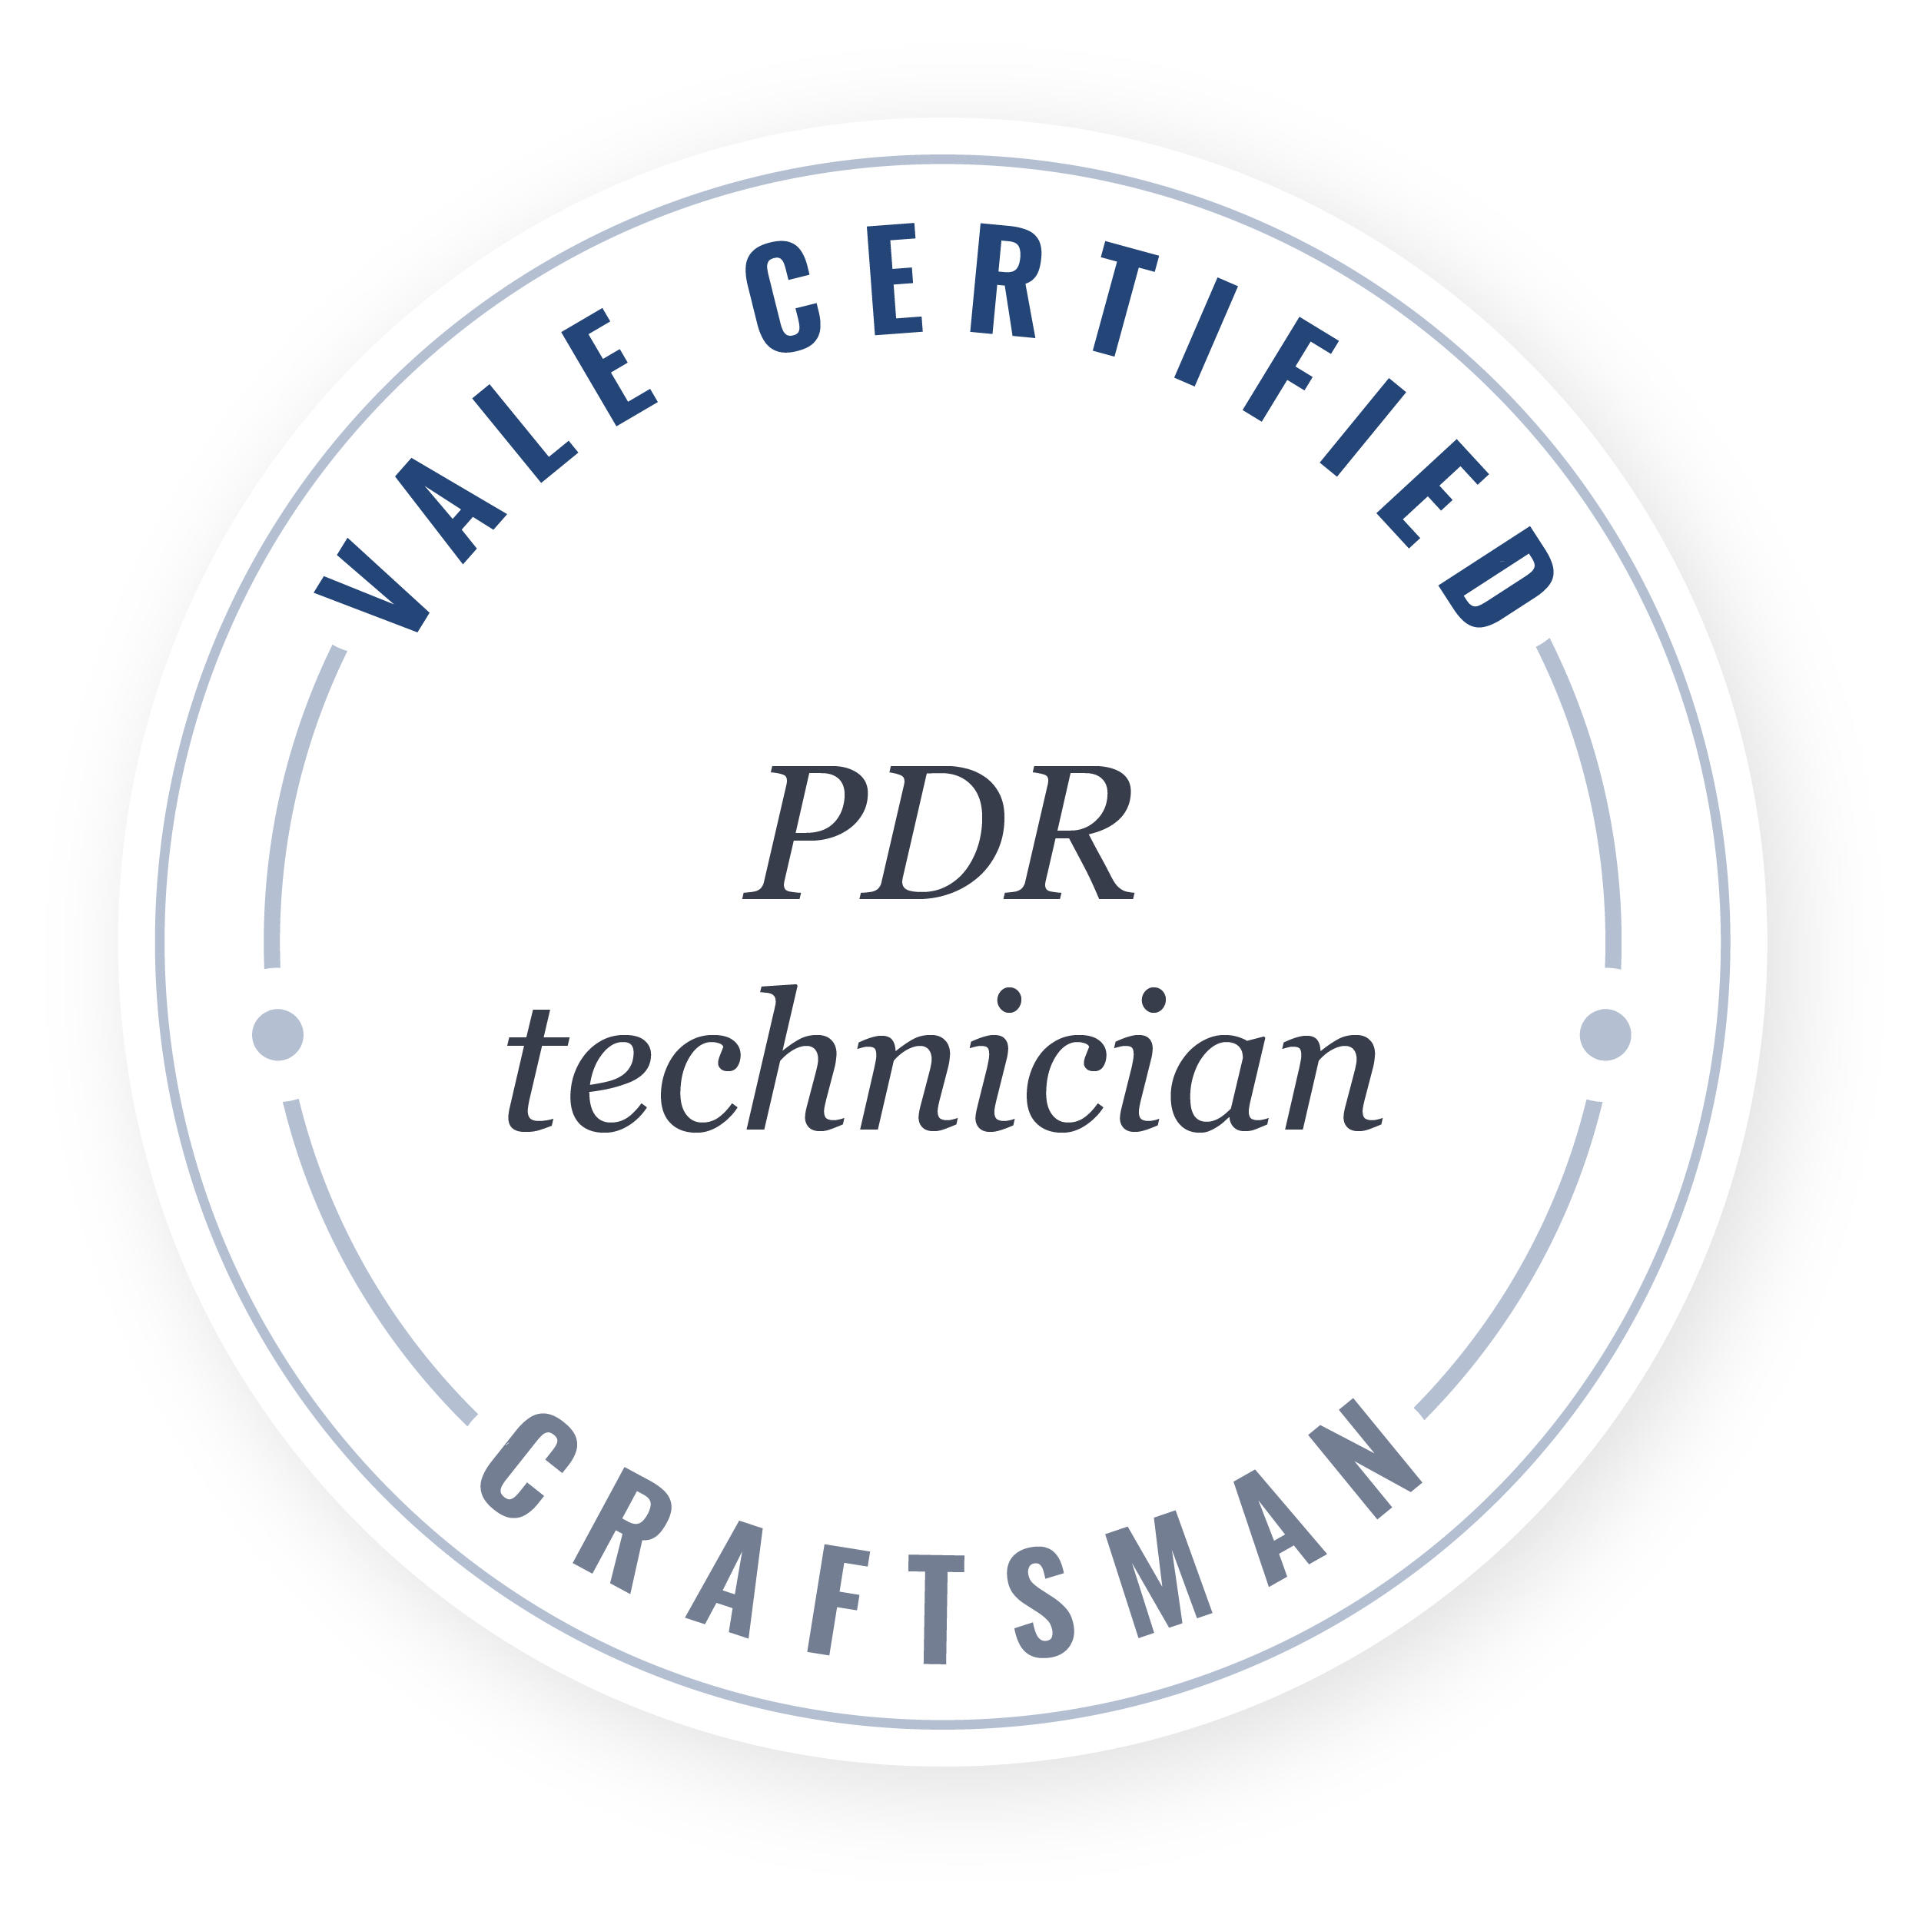 Vale Certified